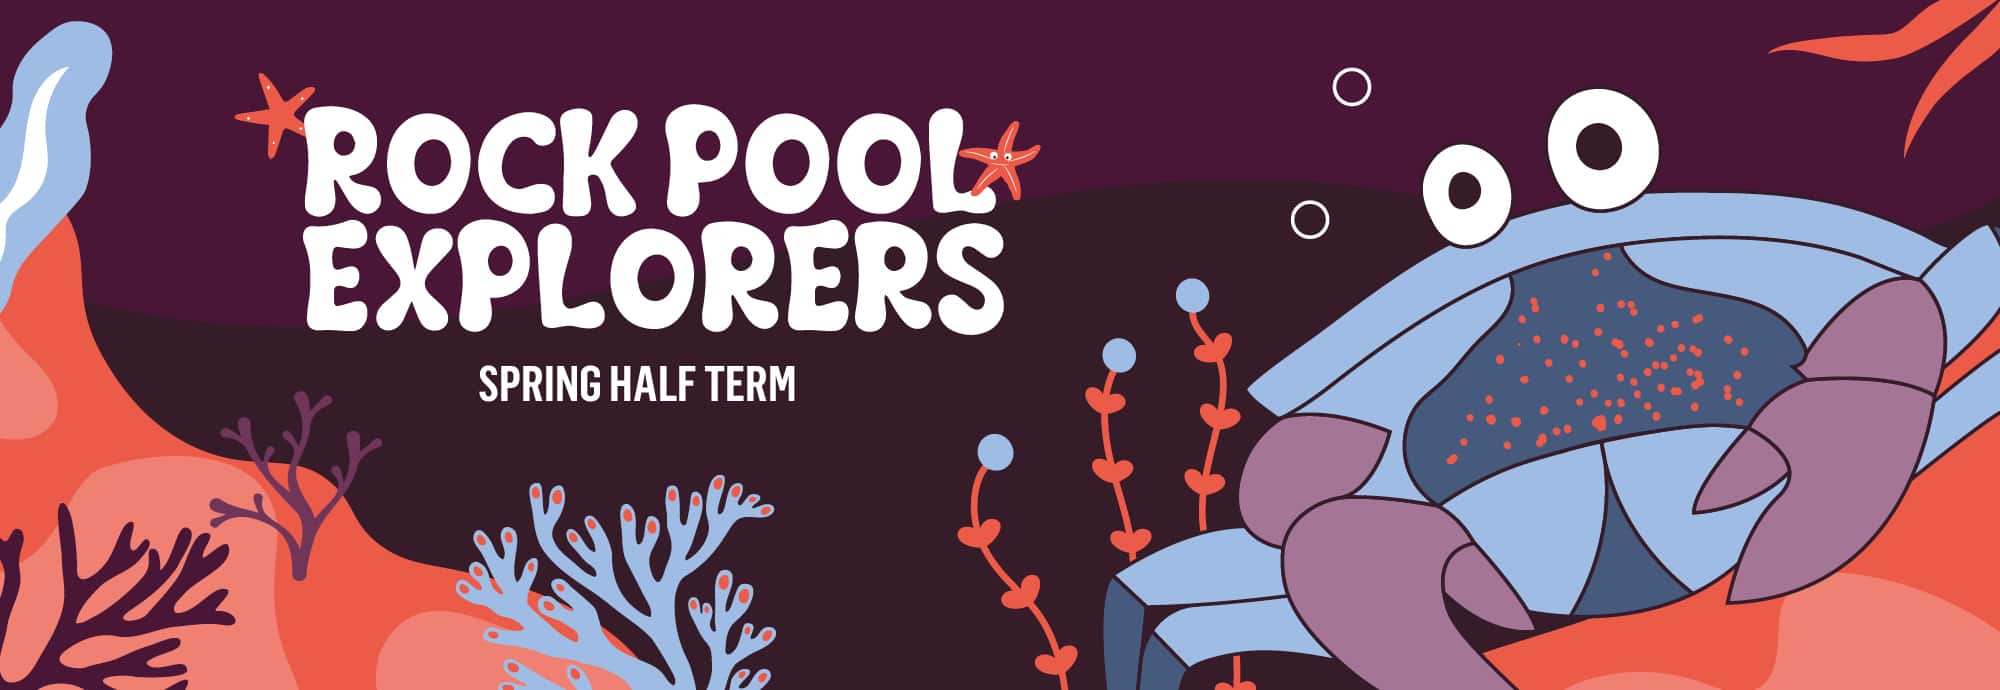 The words 'Rock Pool Explorers - spring half term' are written in white against a dark burgundy background. On the right is a drawing of a blue crab against red soil.